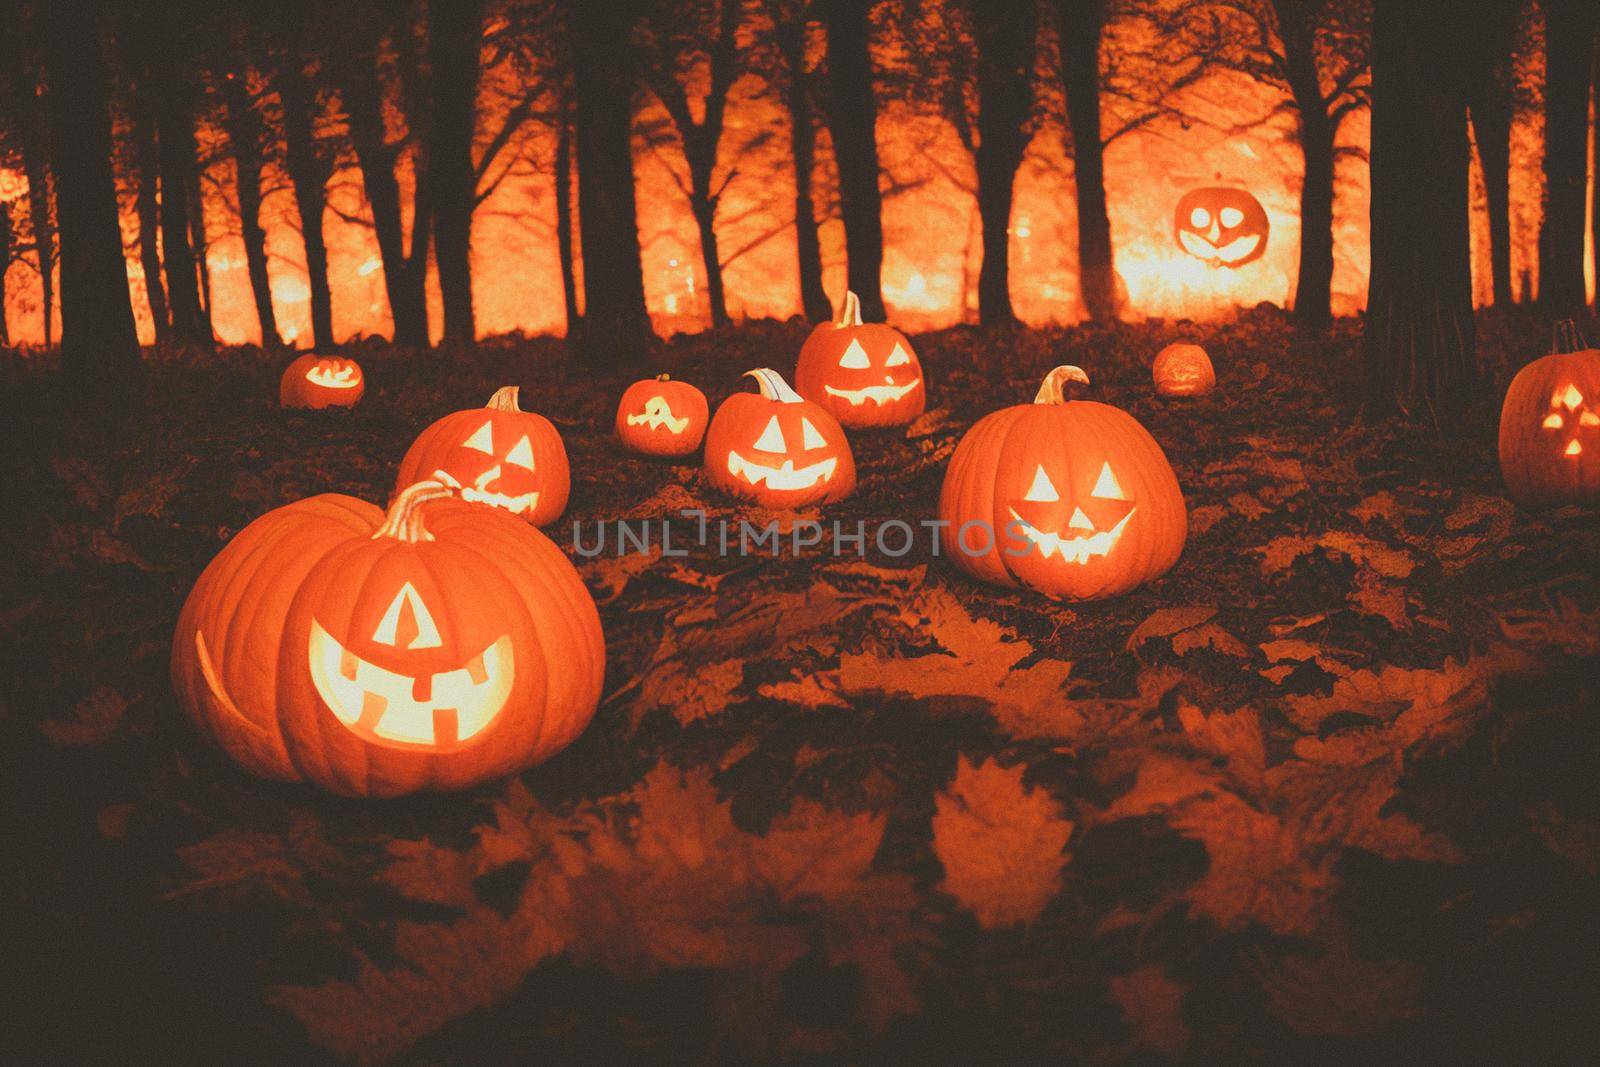 Halloween Pumpkins In A Spooky Forest At Night. 3D illustration.